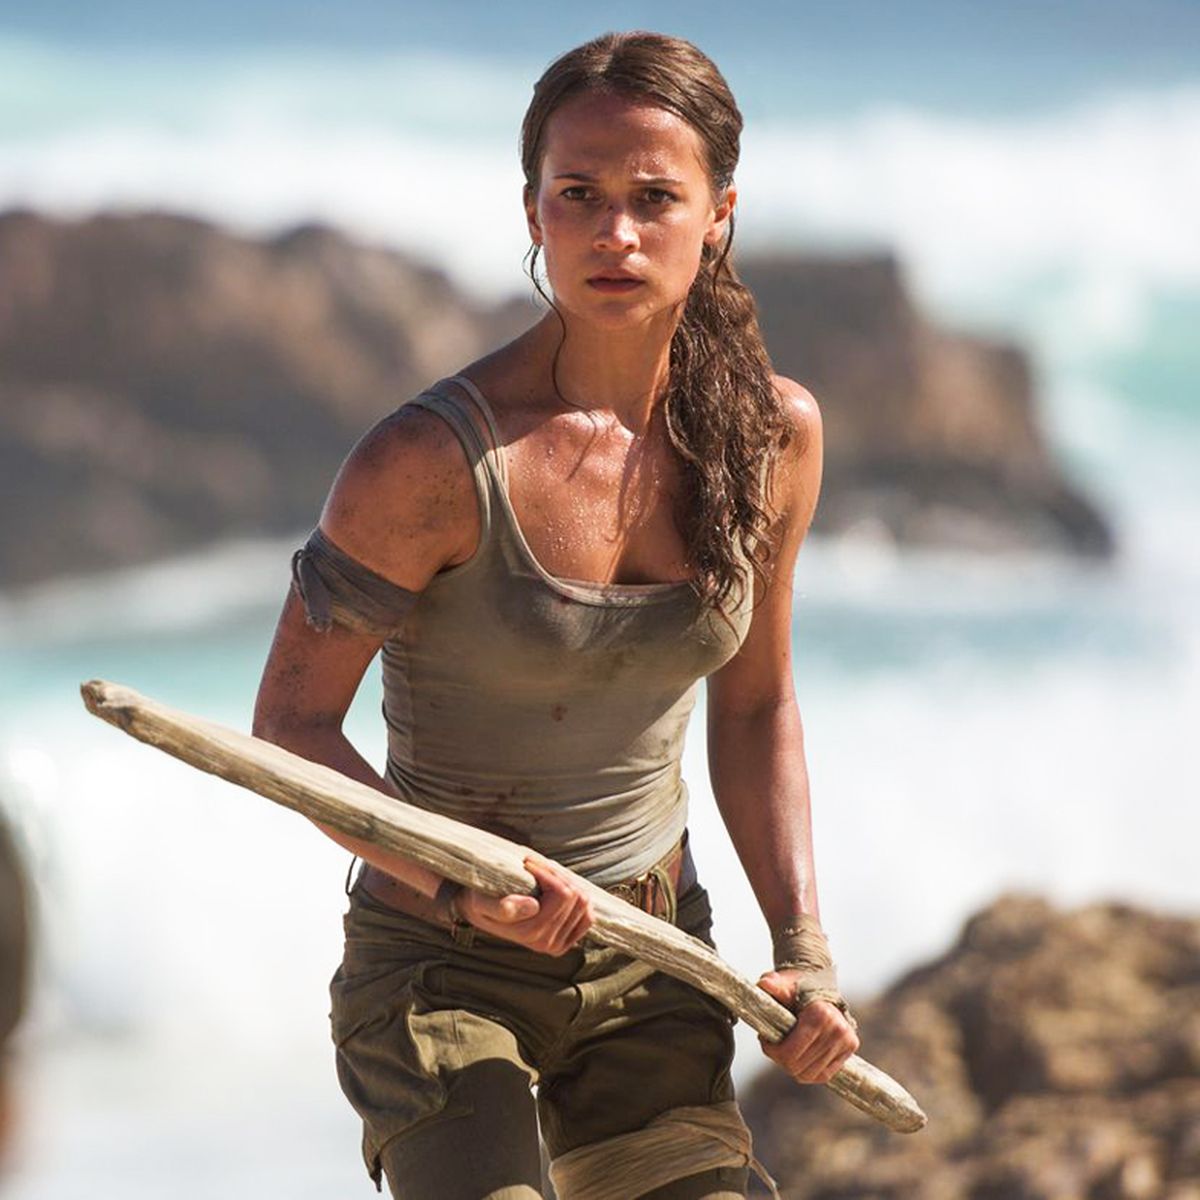 Tomb Raider: New Lara Croft Actress Used to Play the Game in Secret